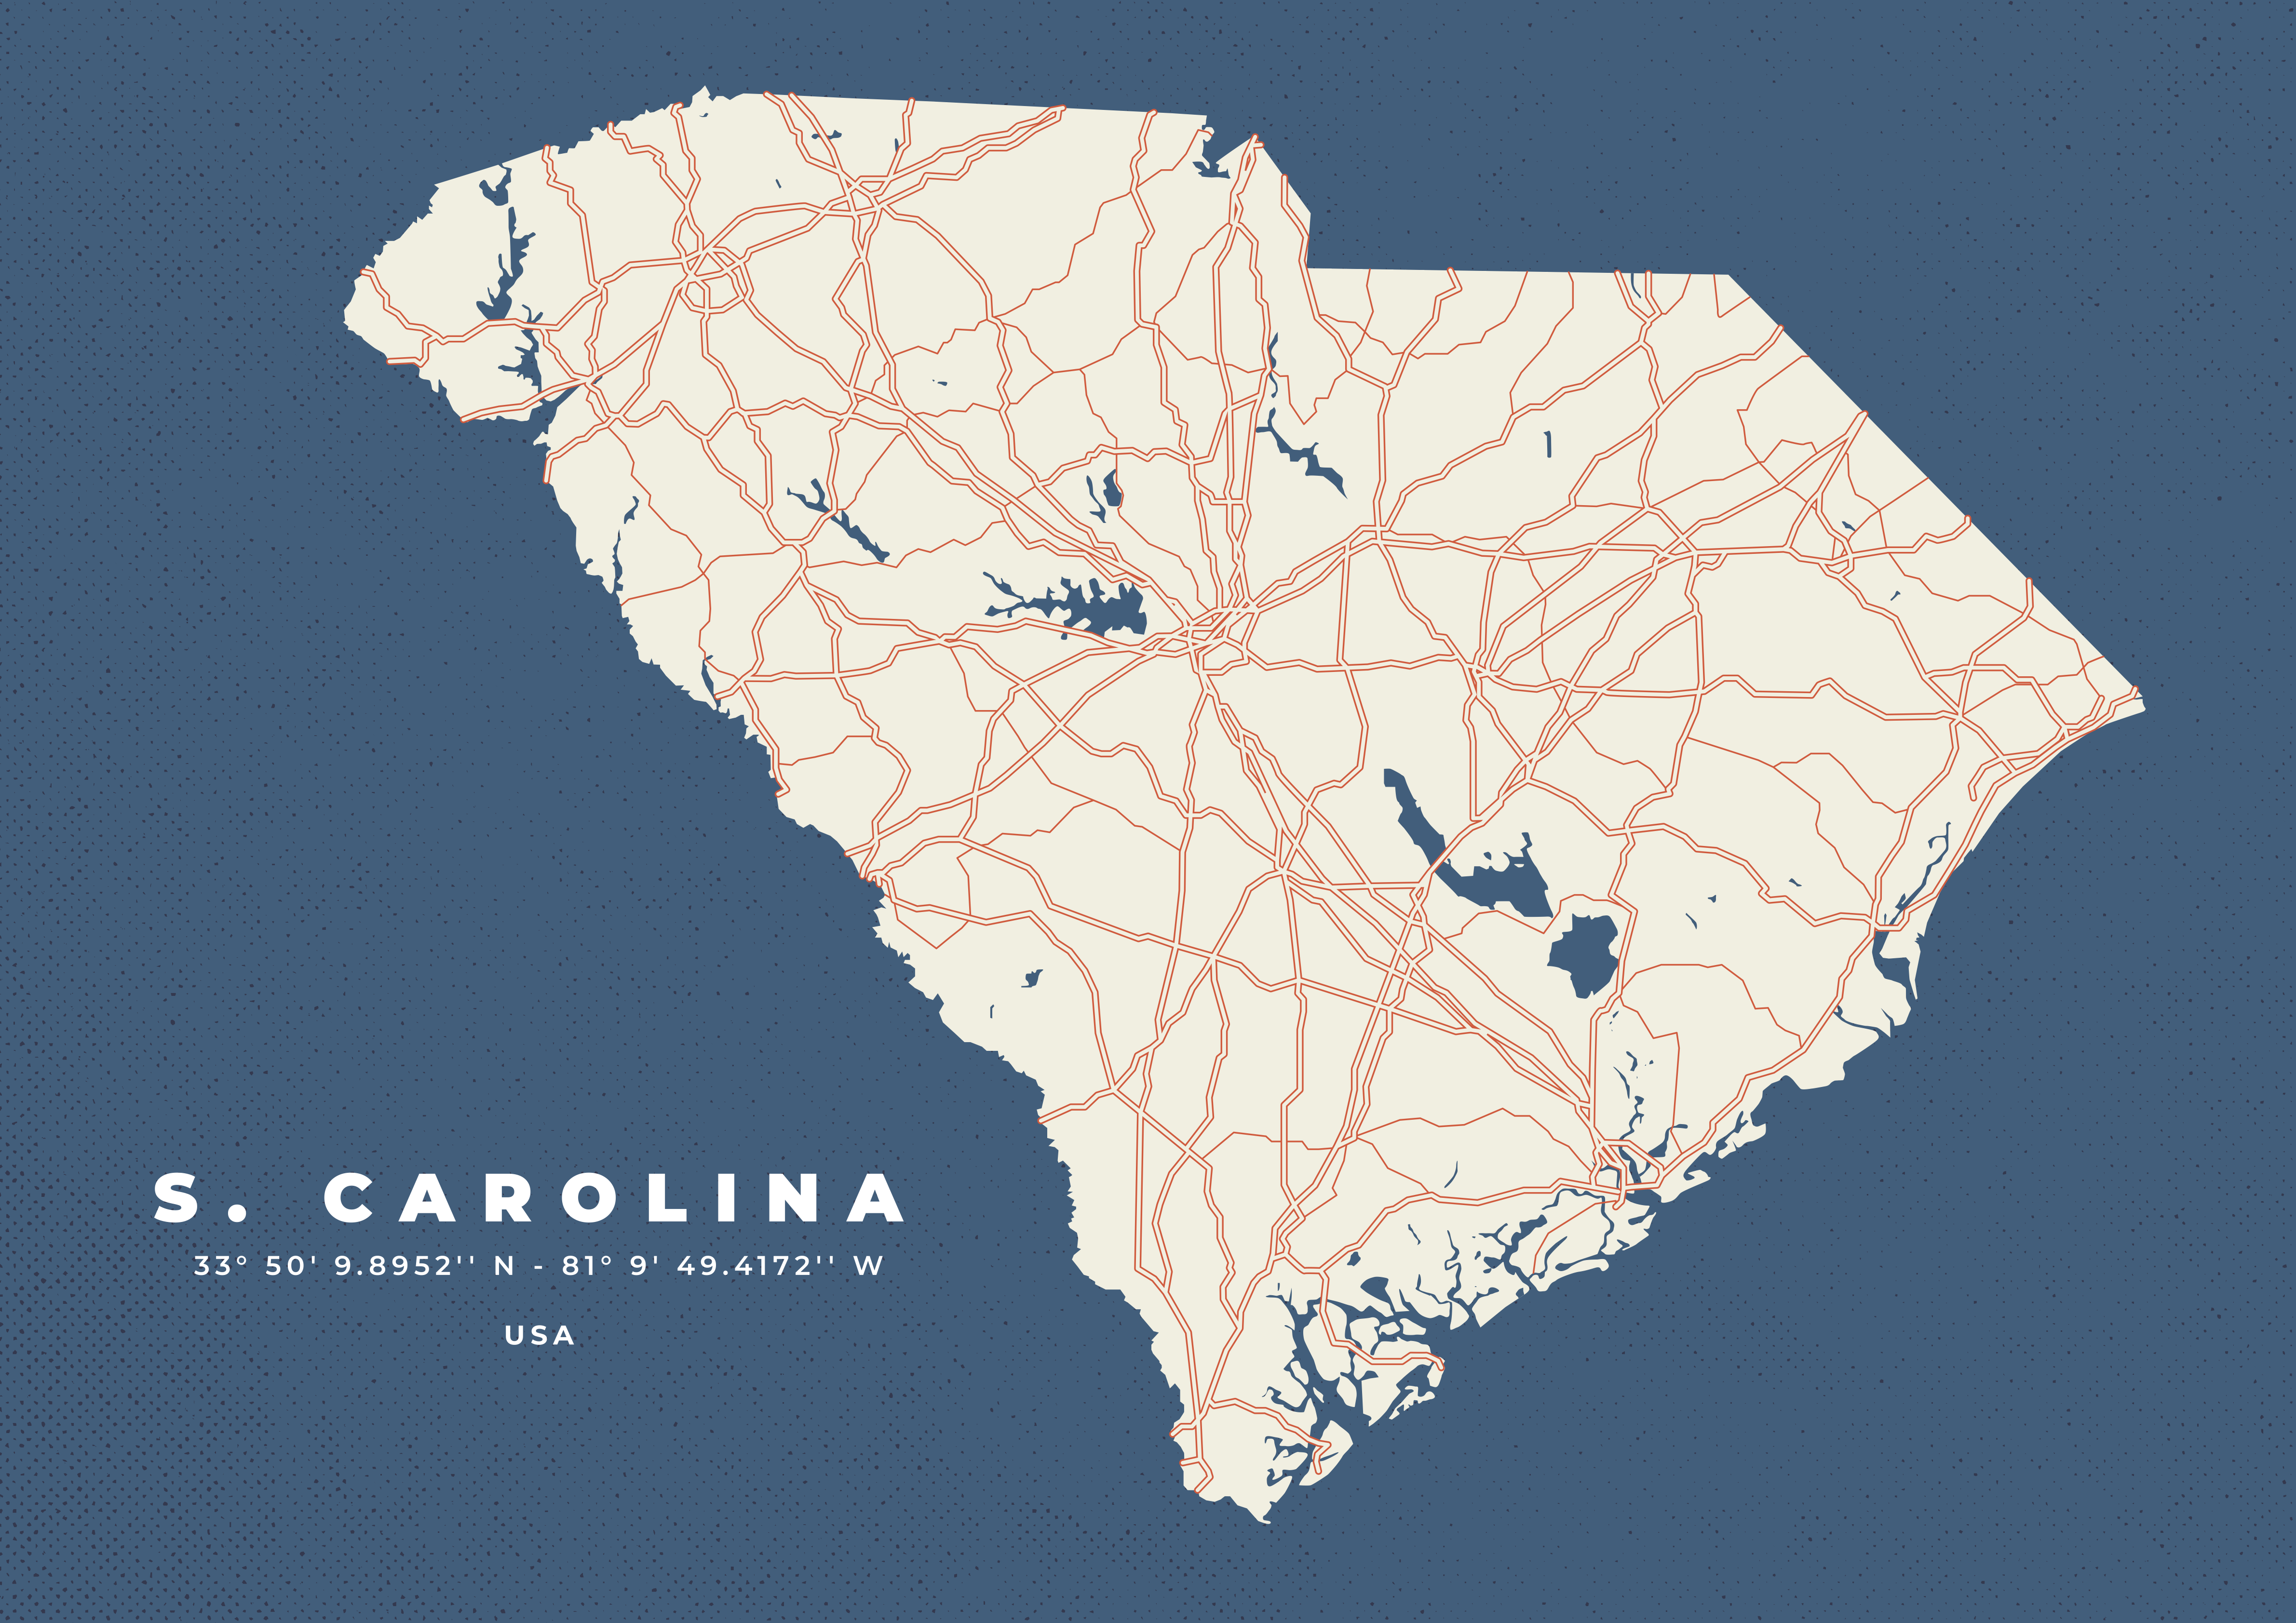 A deep dive on South Carolina’s property tax system: complex, inequitable and uncompetitive